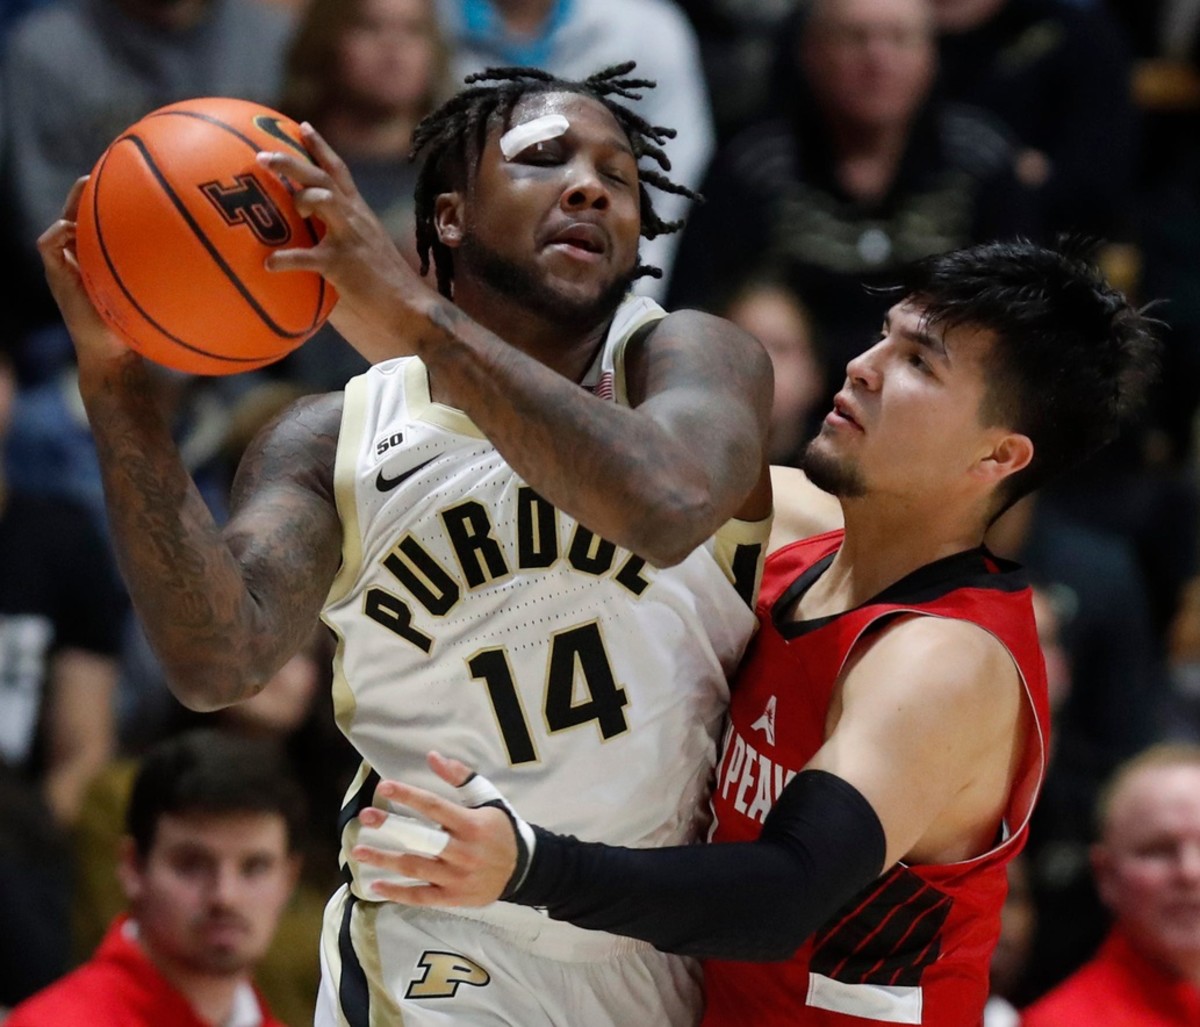 Purdue Boilermakers guard David Jenkins Jr. (14) is fouled by Austin Peay Governors guard Carlos Paez (1) during NCAA men s basketball game, Friday, Nov. 11, 2022, at Mackey Arena in West Lafayette, Ind.